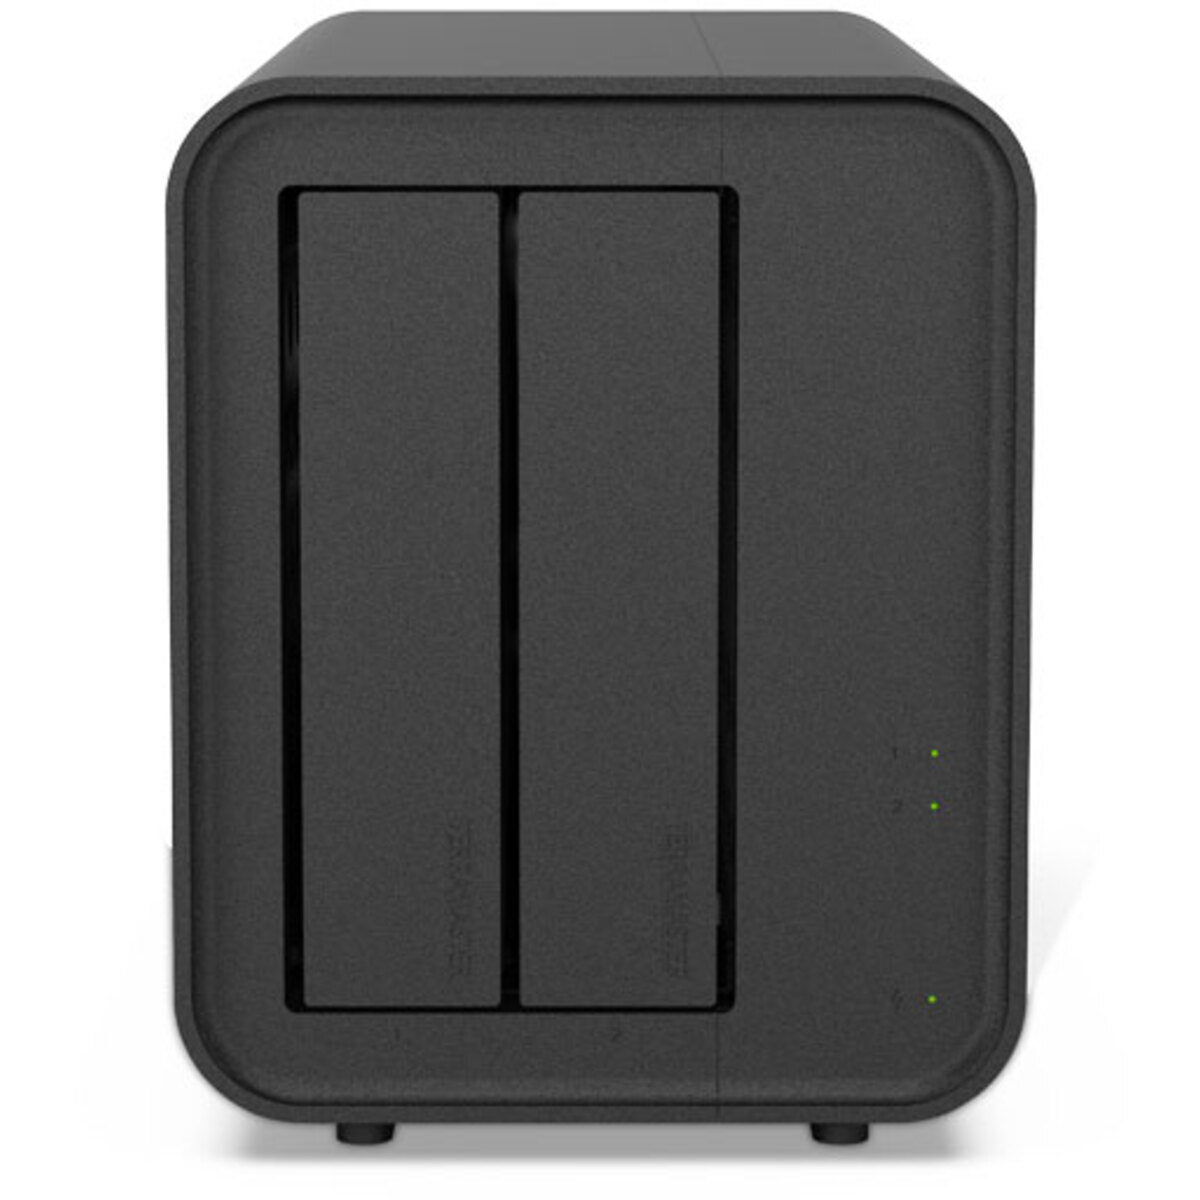 TerraMaster F2-424 36tb 2-Bay Desktop Multimedia / Power User / Business NAS - Network Attached Storage Device 2x18tb Seagate EXOS X18 ST18000NM000J 3.5 7200rpm SATA 6Gb/s HDD ENTERPRISE Class Drives Installed - Burn-In Tested F2-424